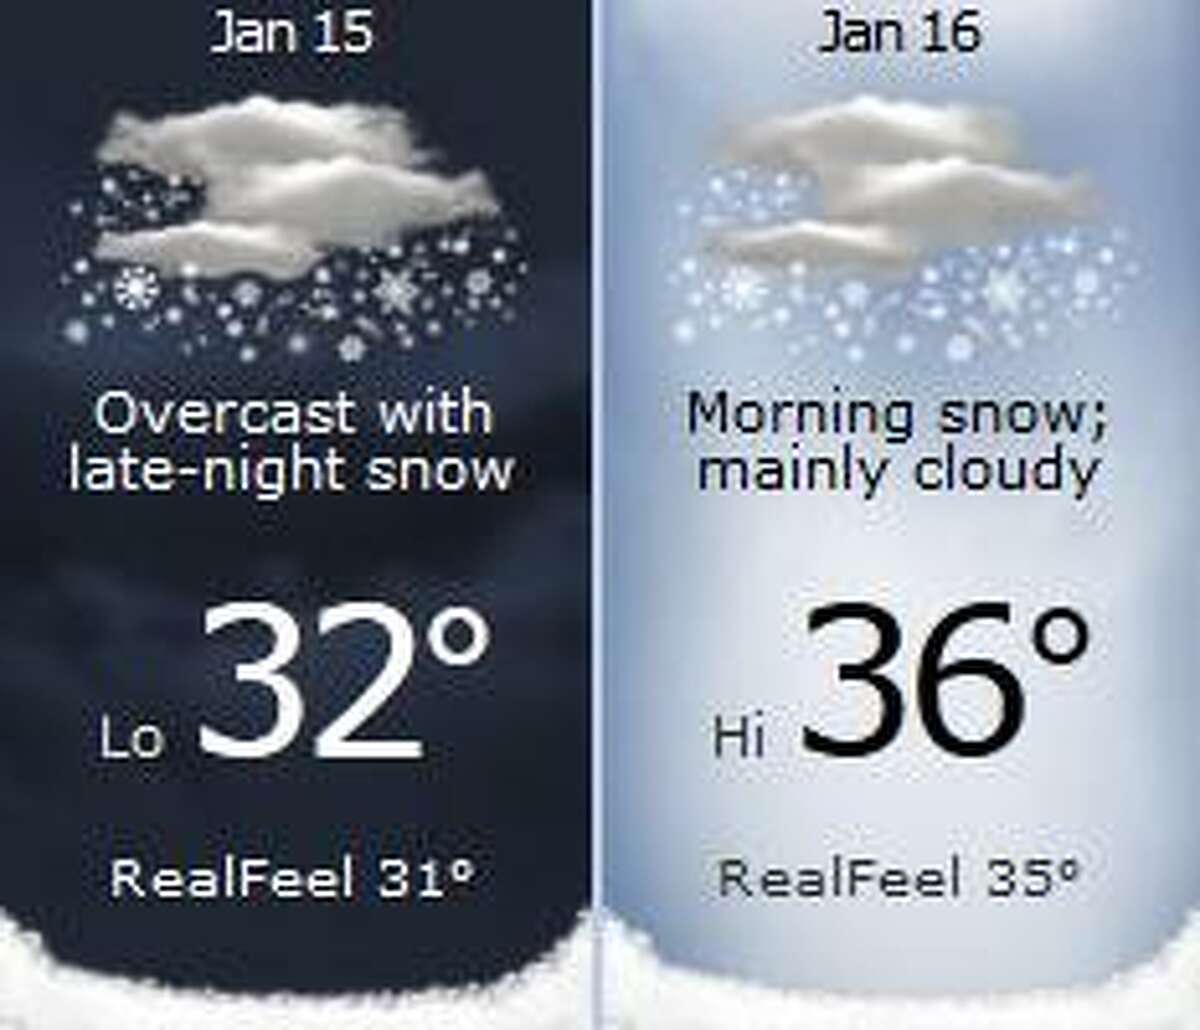 As of 9 a.m., AccuWeather forecasts snow starting late tonight and into Wednesday morning.